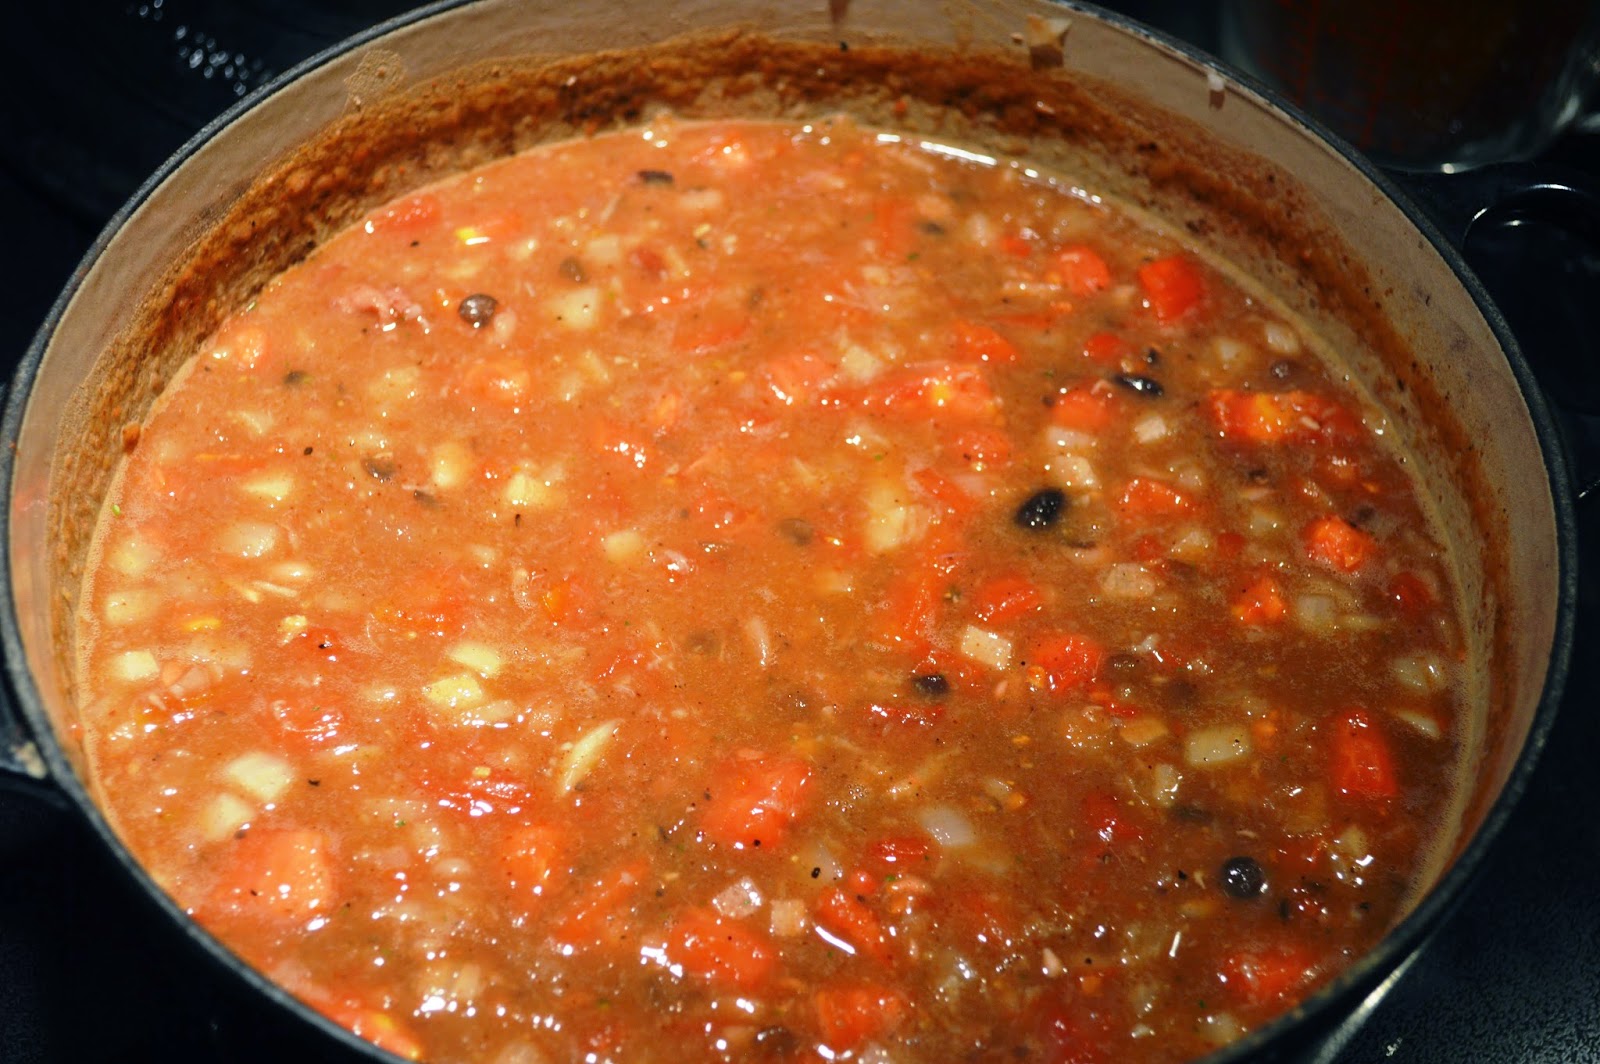 Clever Soiree: 13 Bean Soup from Bob's Red Mill Mix